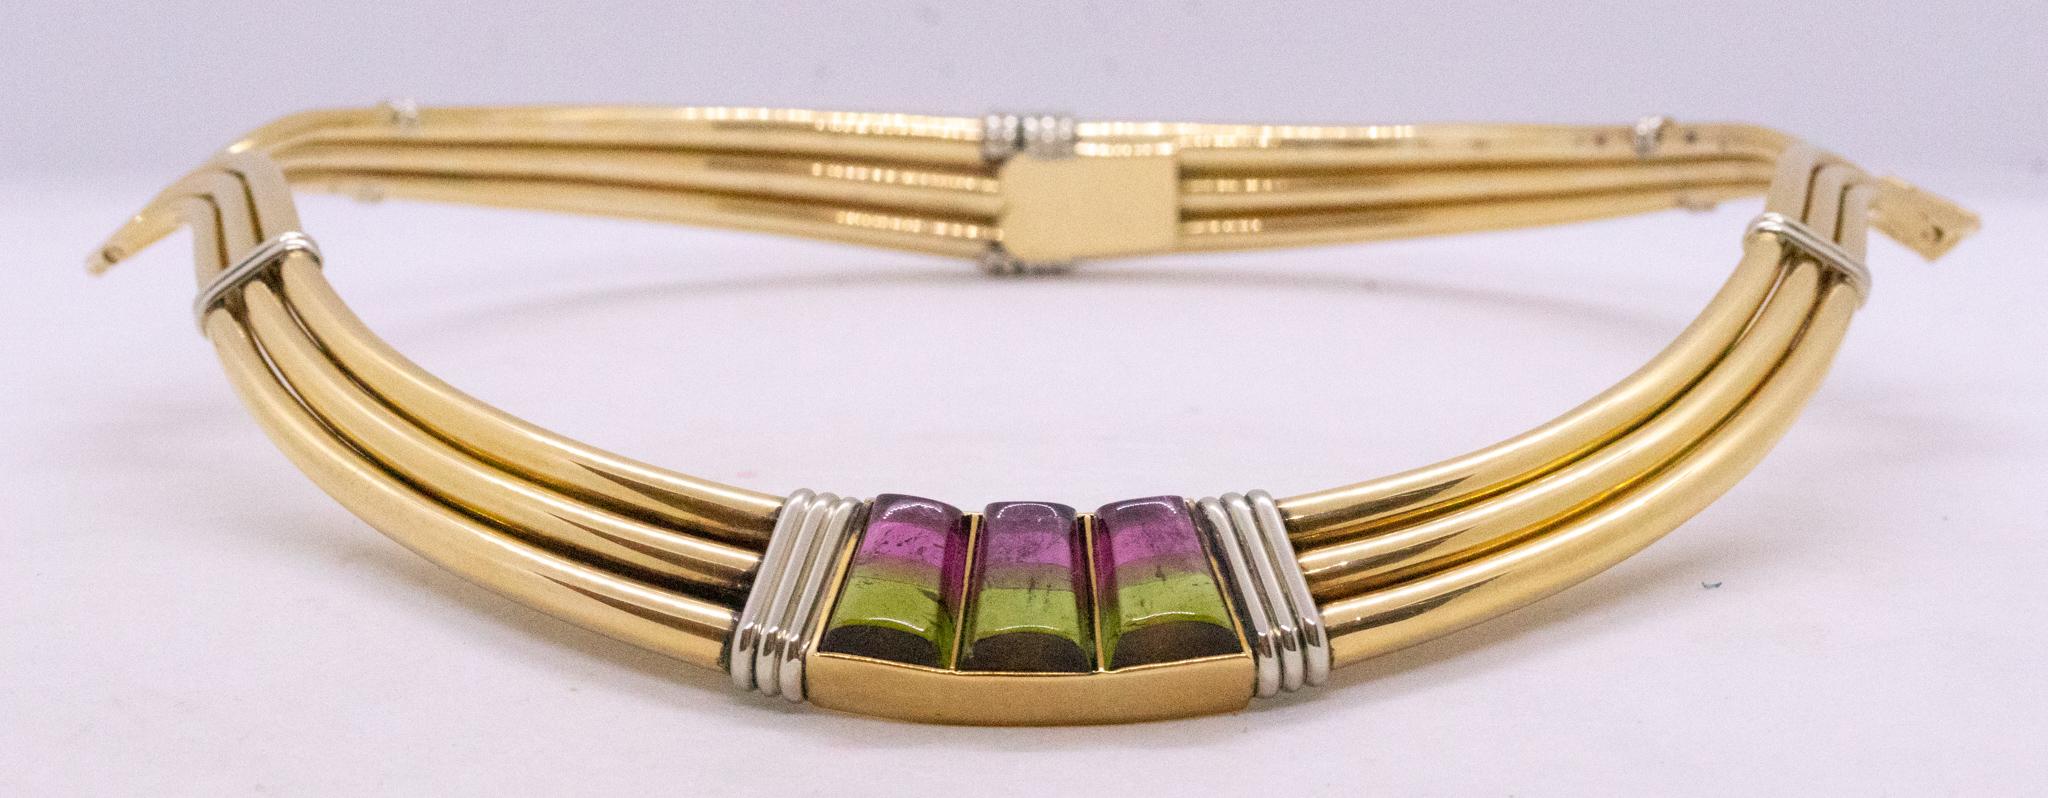 Modernist Gucci 1970 Milan Very Rare Choker Necklace 18Kt Gold 16.02 Cts in Tourmaline